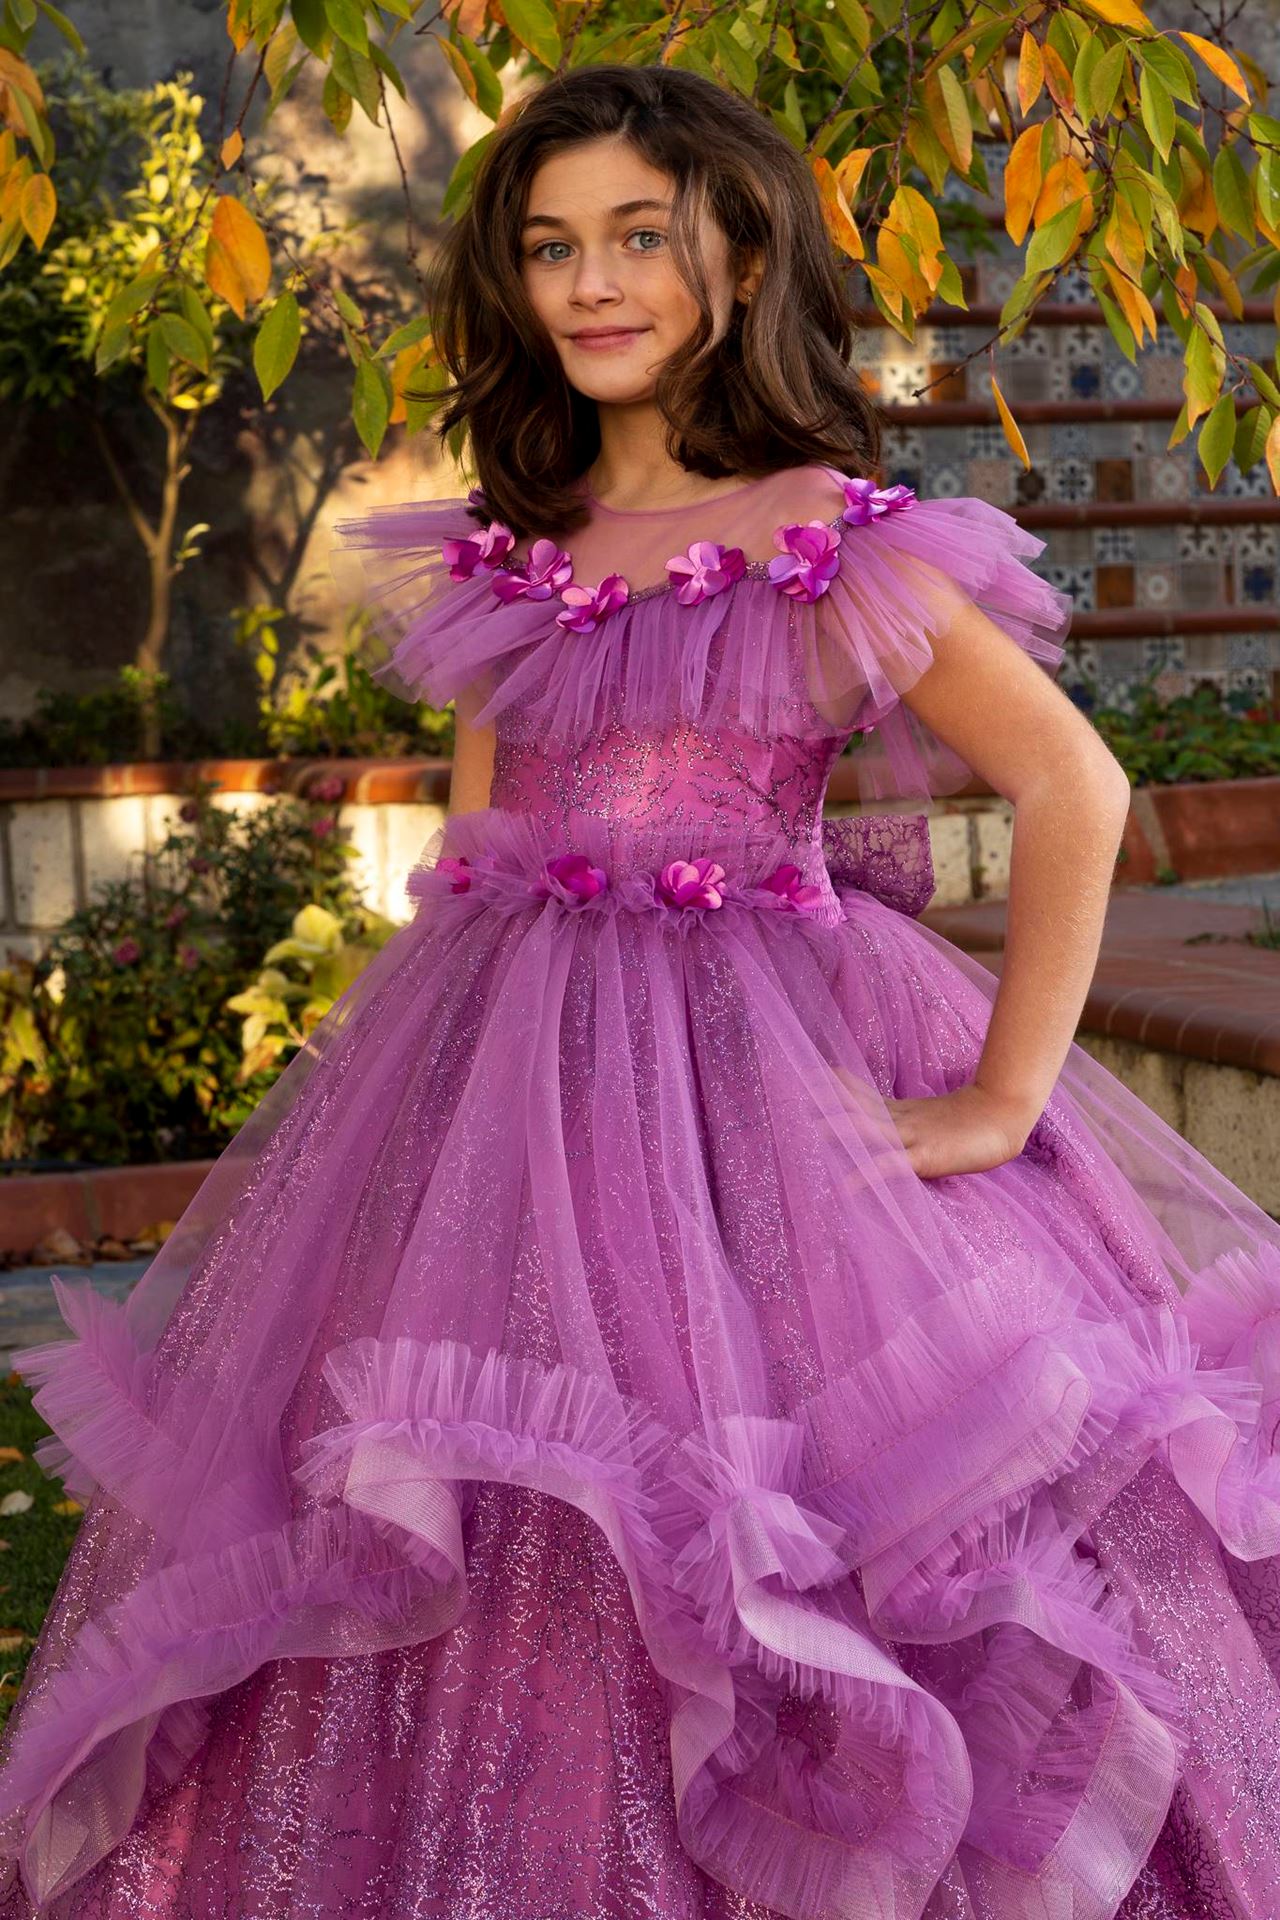 Dazzle 7-11 Years Old Girl Dress 30079 Lilac